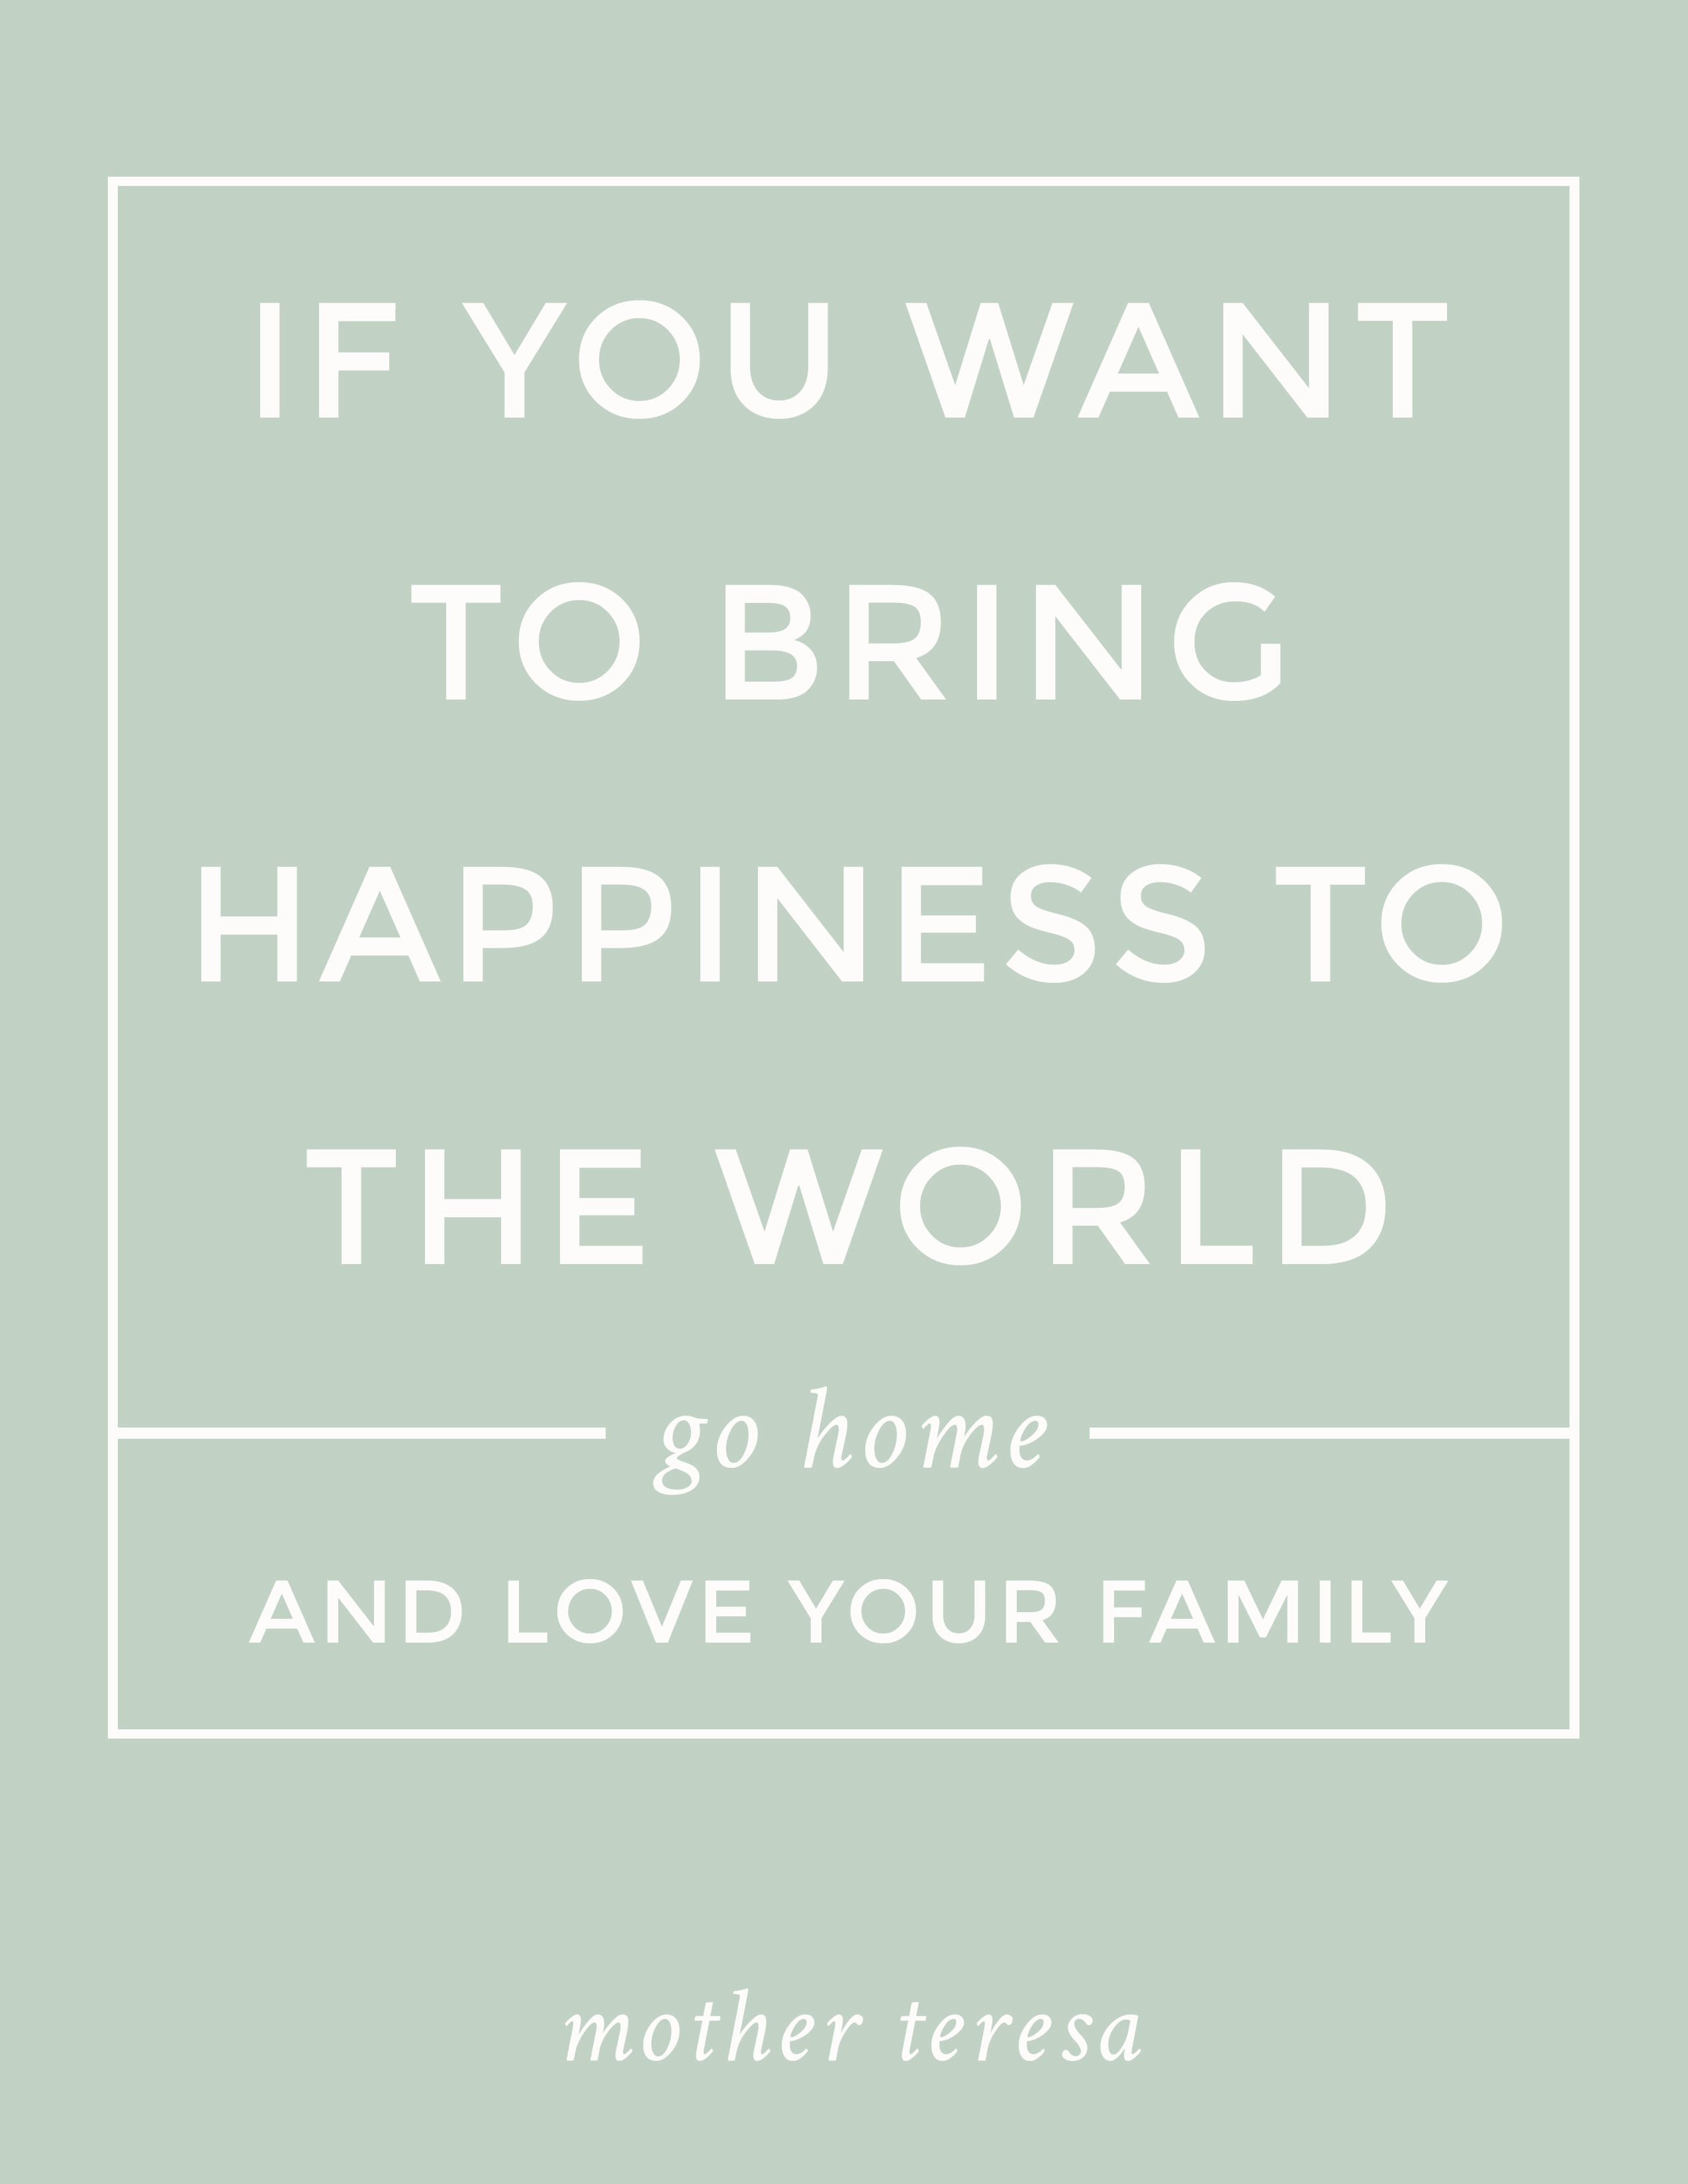 Free PRINTABLE quote: "If you want to bring happiness to the world, go home and love your family." Mother Teresa